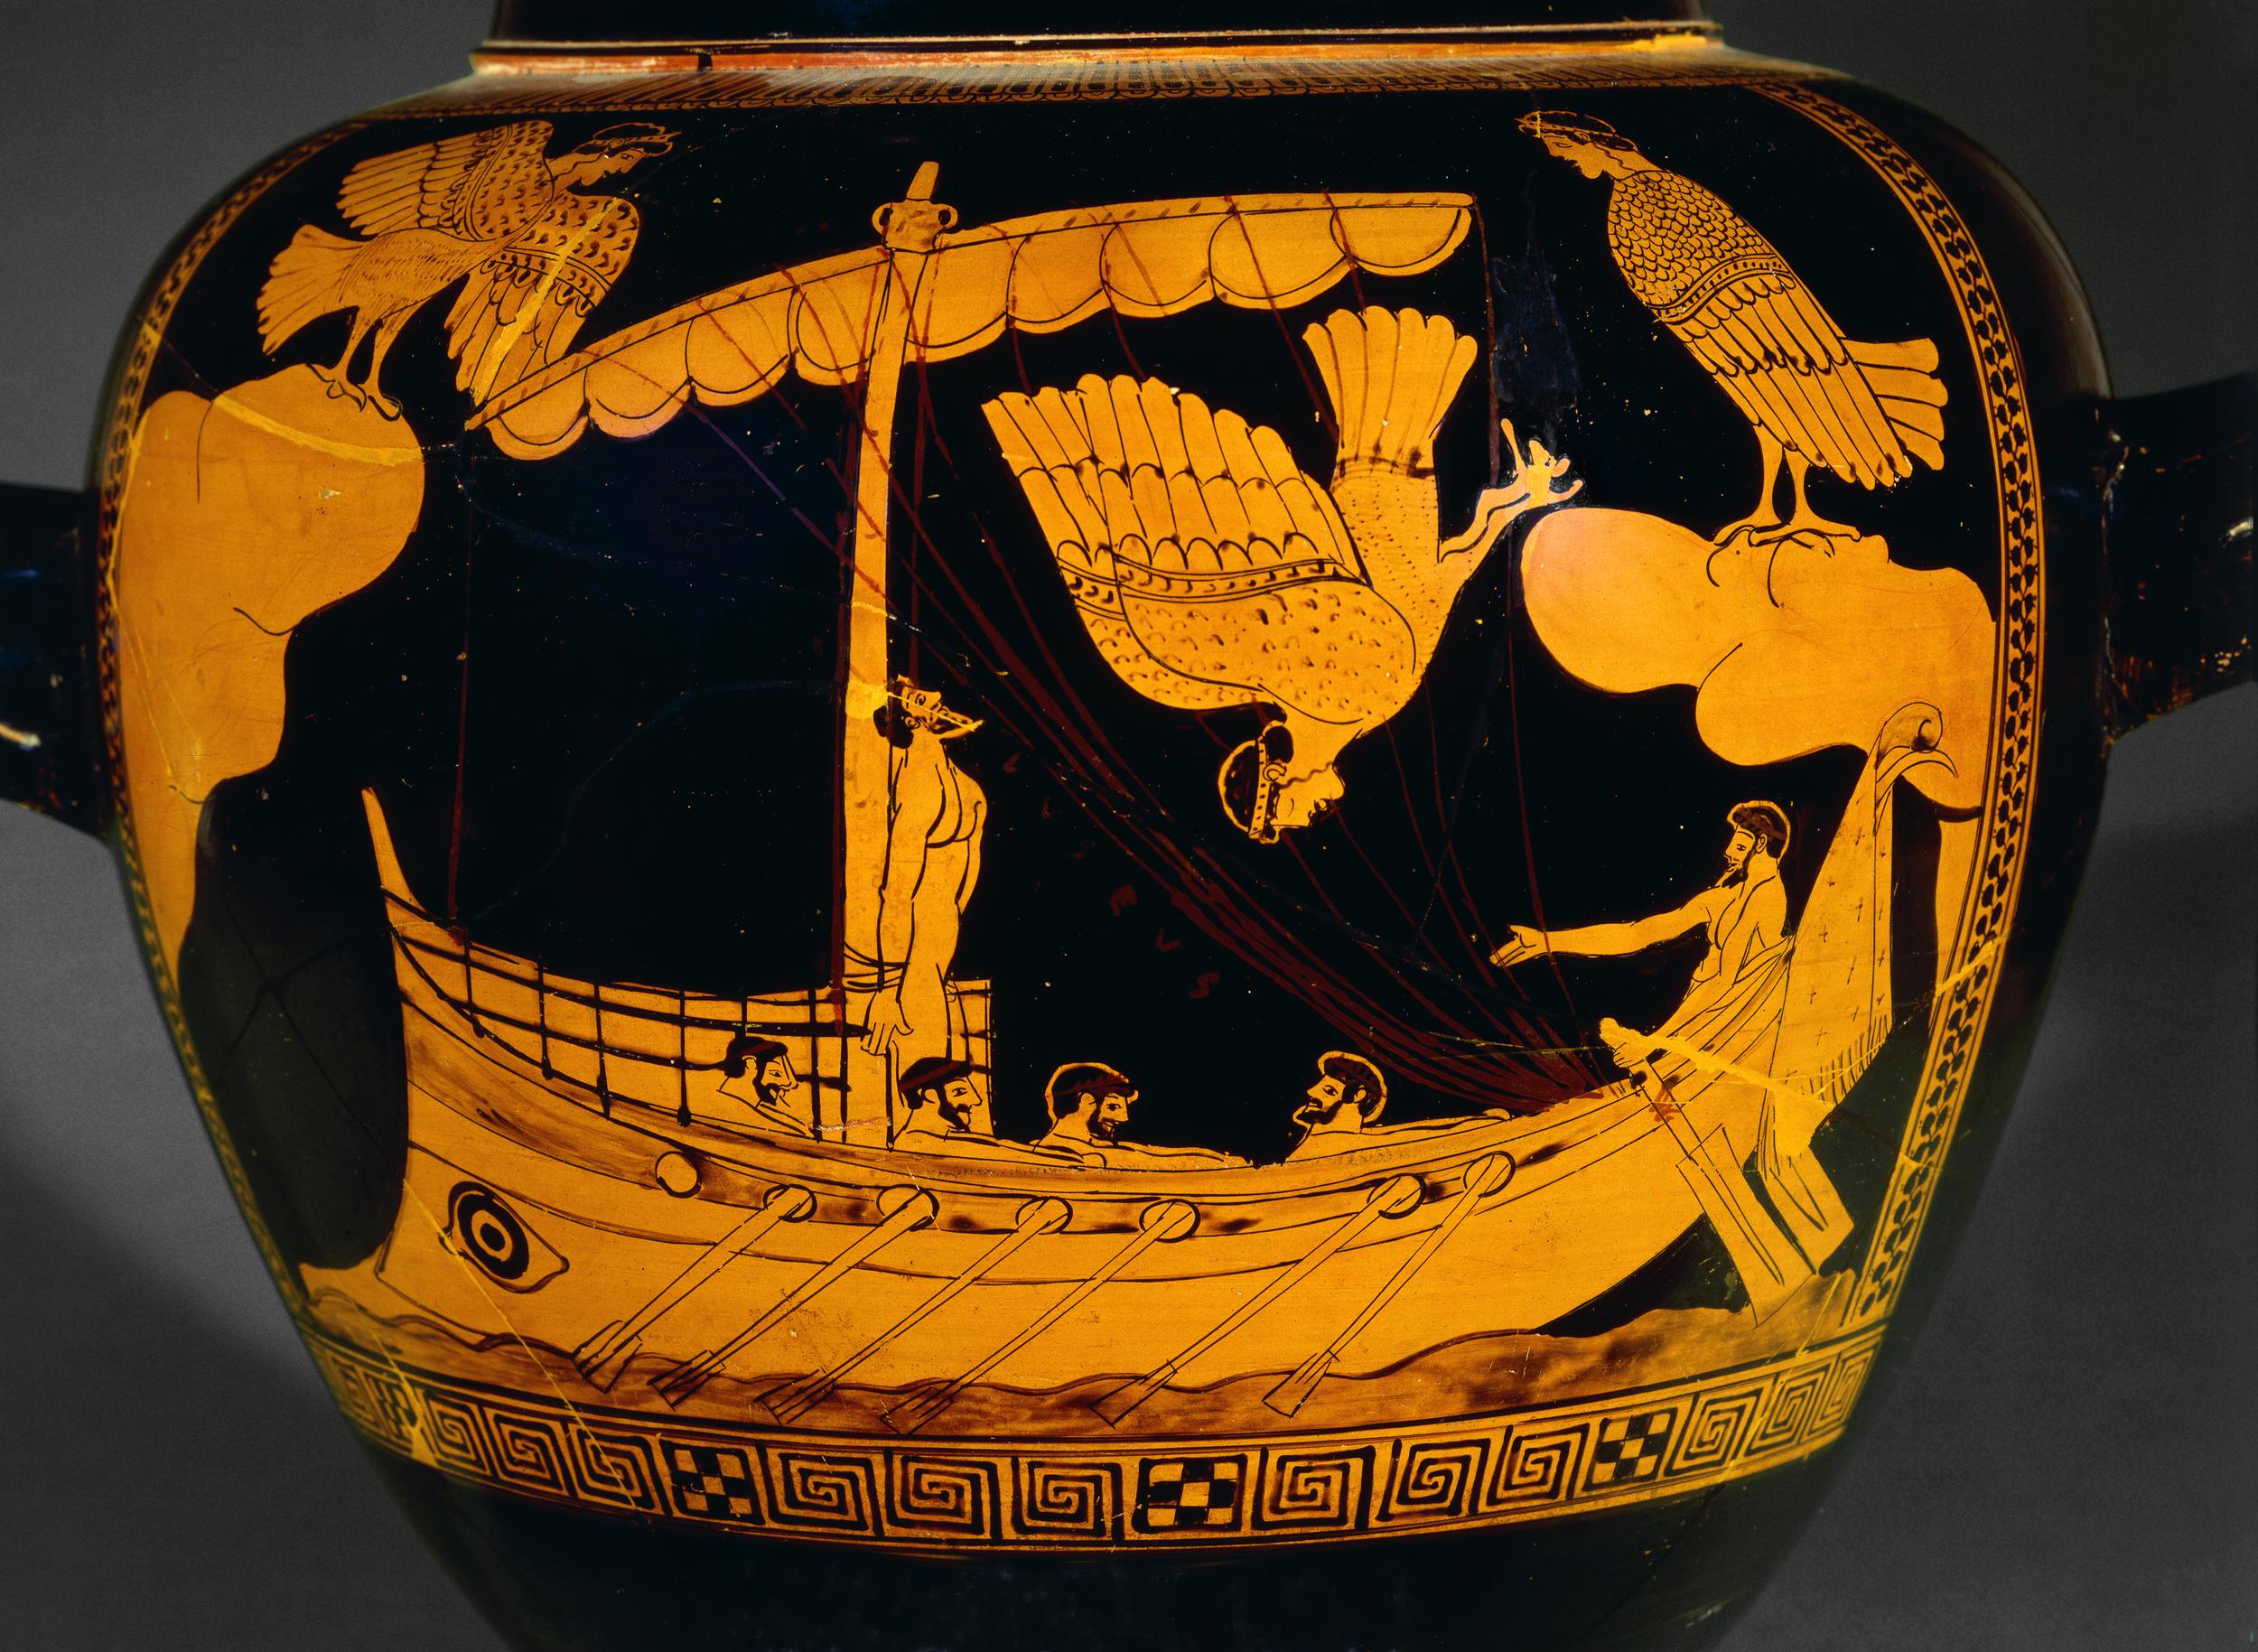 Odysseus stands on his ship, tied to the mast. Four crew members row, and one stands at the front of the ship acting as coxswain. Two sirens, large birds with the heads of young women, perch on cliffs on either side. Another siren dives down towards the ship.